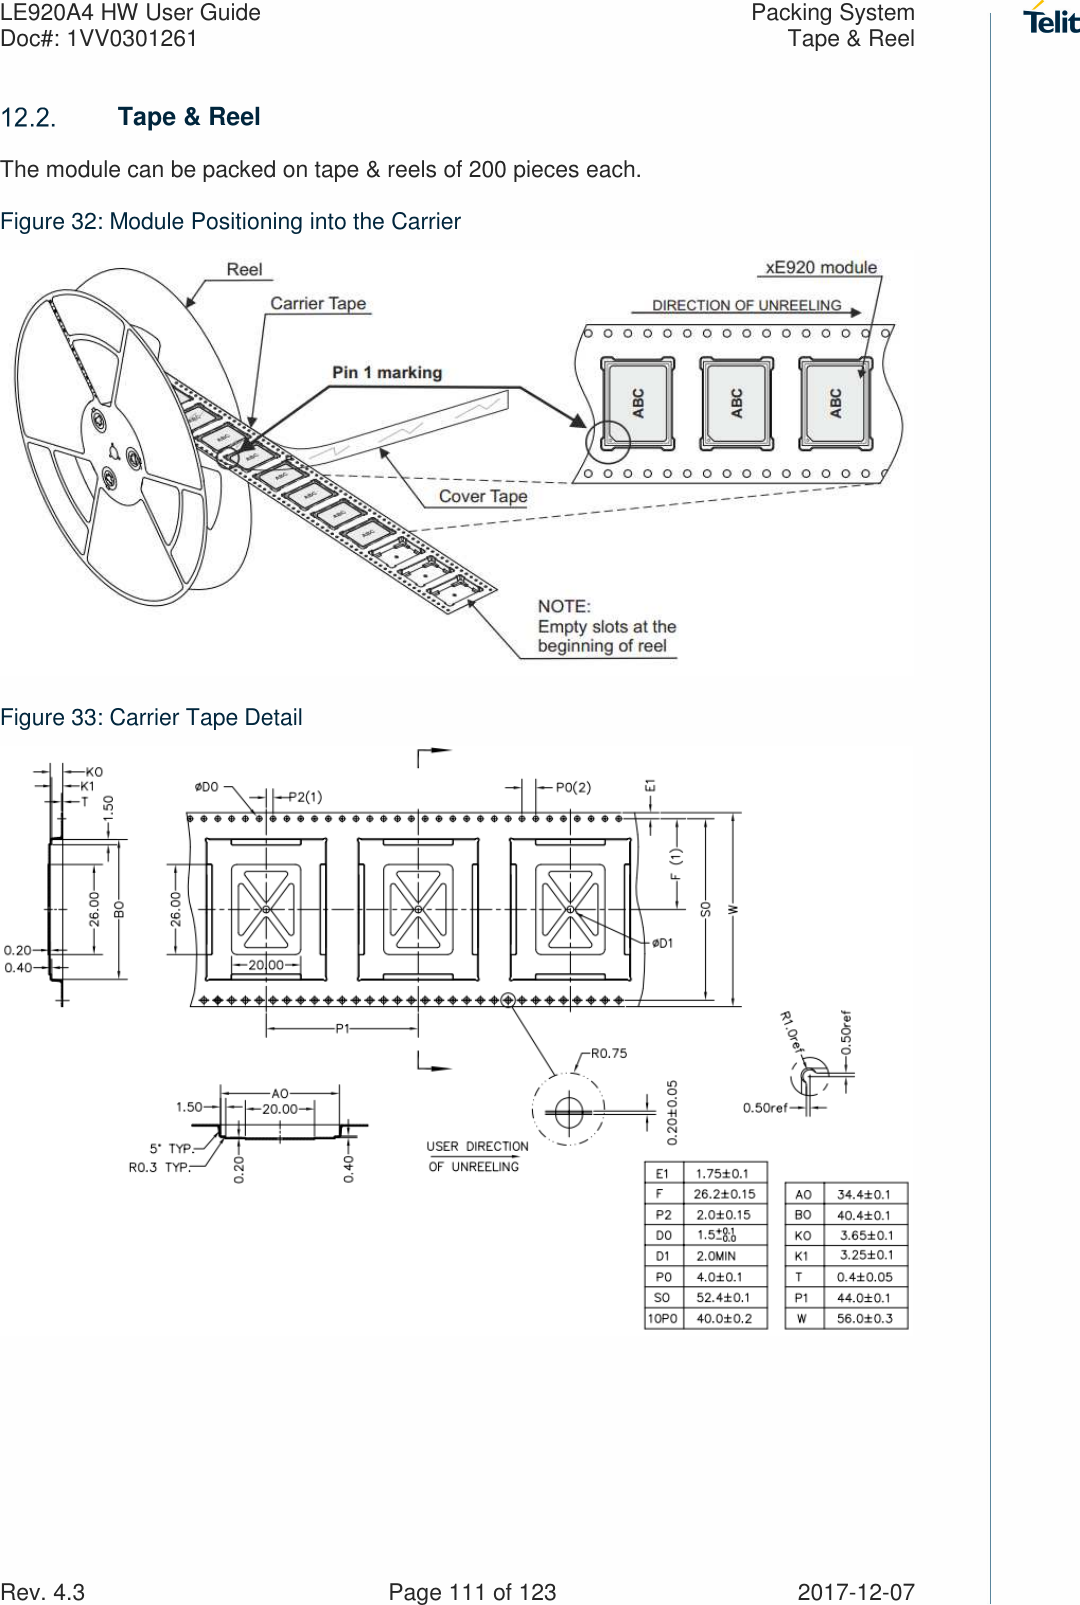 LE920A4 HW User Guide  Packing System Doc#: 1VV0301261  Tape &amp; Reel Rev. 4.3    Page 111 of 123  2017-12-07  Tape &amp; Reel The module can be packed on tape &amp; reels of 200 pieces each. Figure 32: Module Positioning into the Carrier  Figure 33: Carrier Tape Detail   